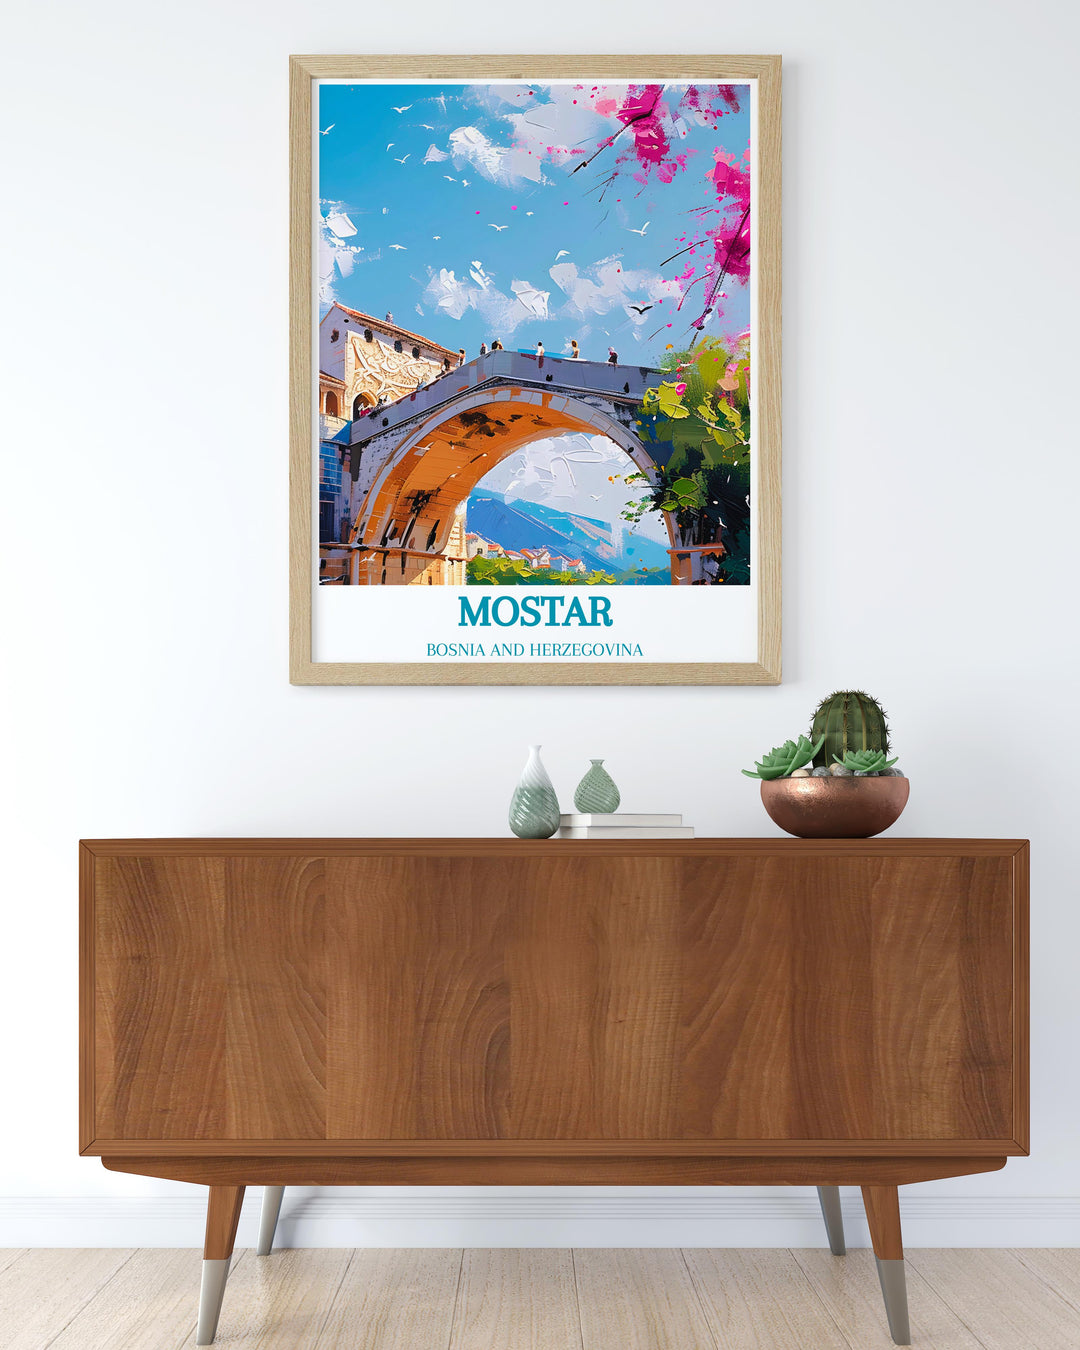 Travel poster of Bosnia, capturing the essence of Herzegovinian life and landscapes, perfect for global culture enthusiasts.